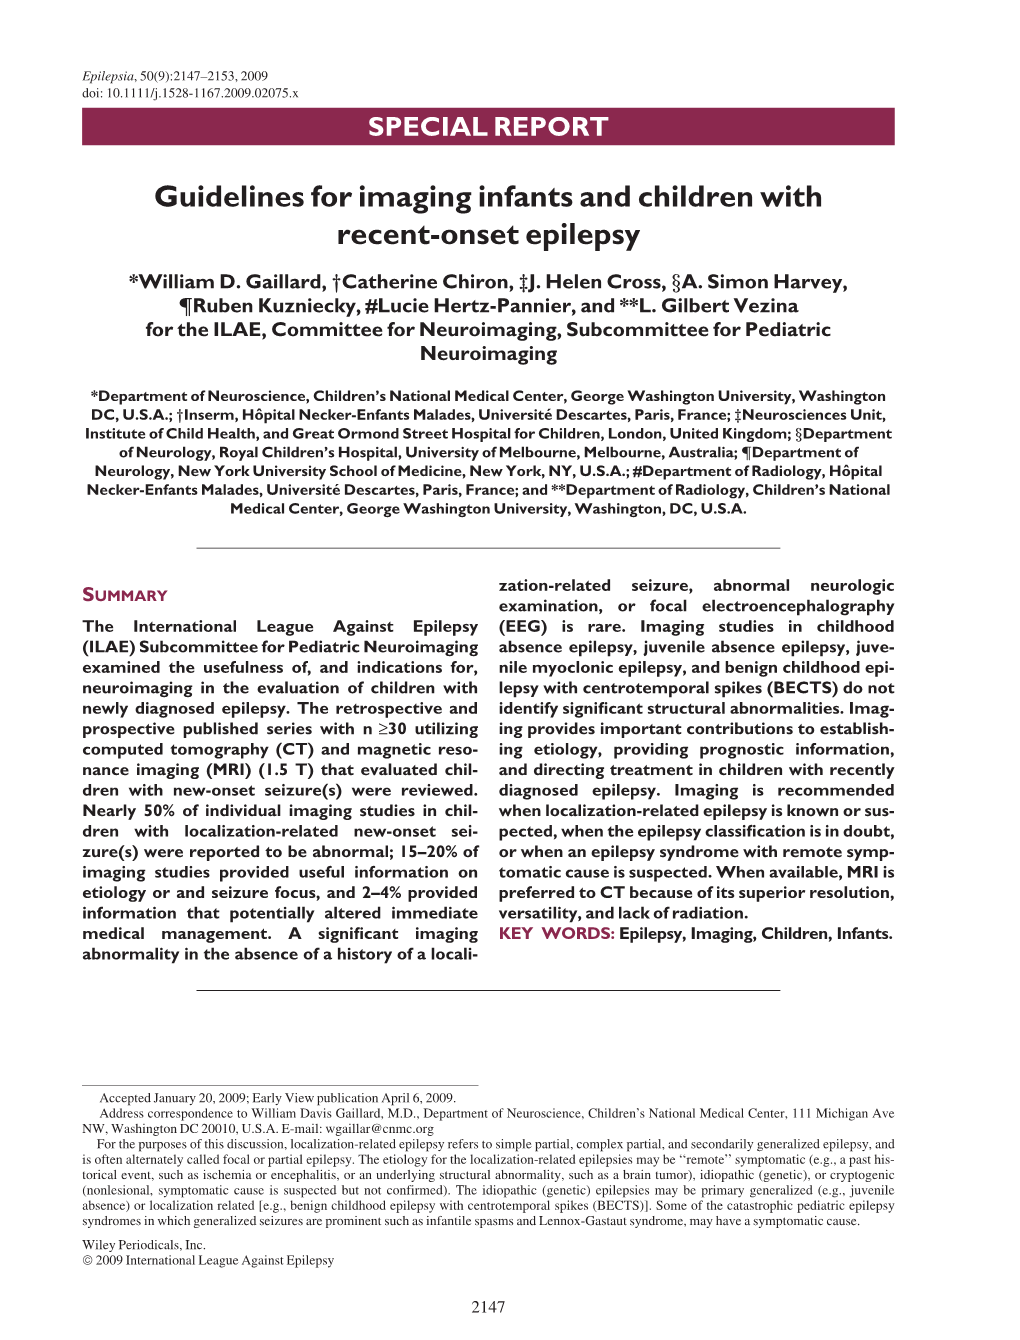 Guidelines for Imaging Infants and Children with Recent-Onset Epilepsy